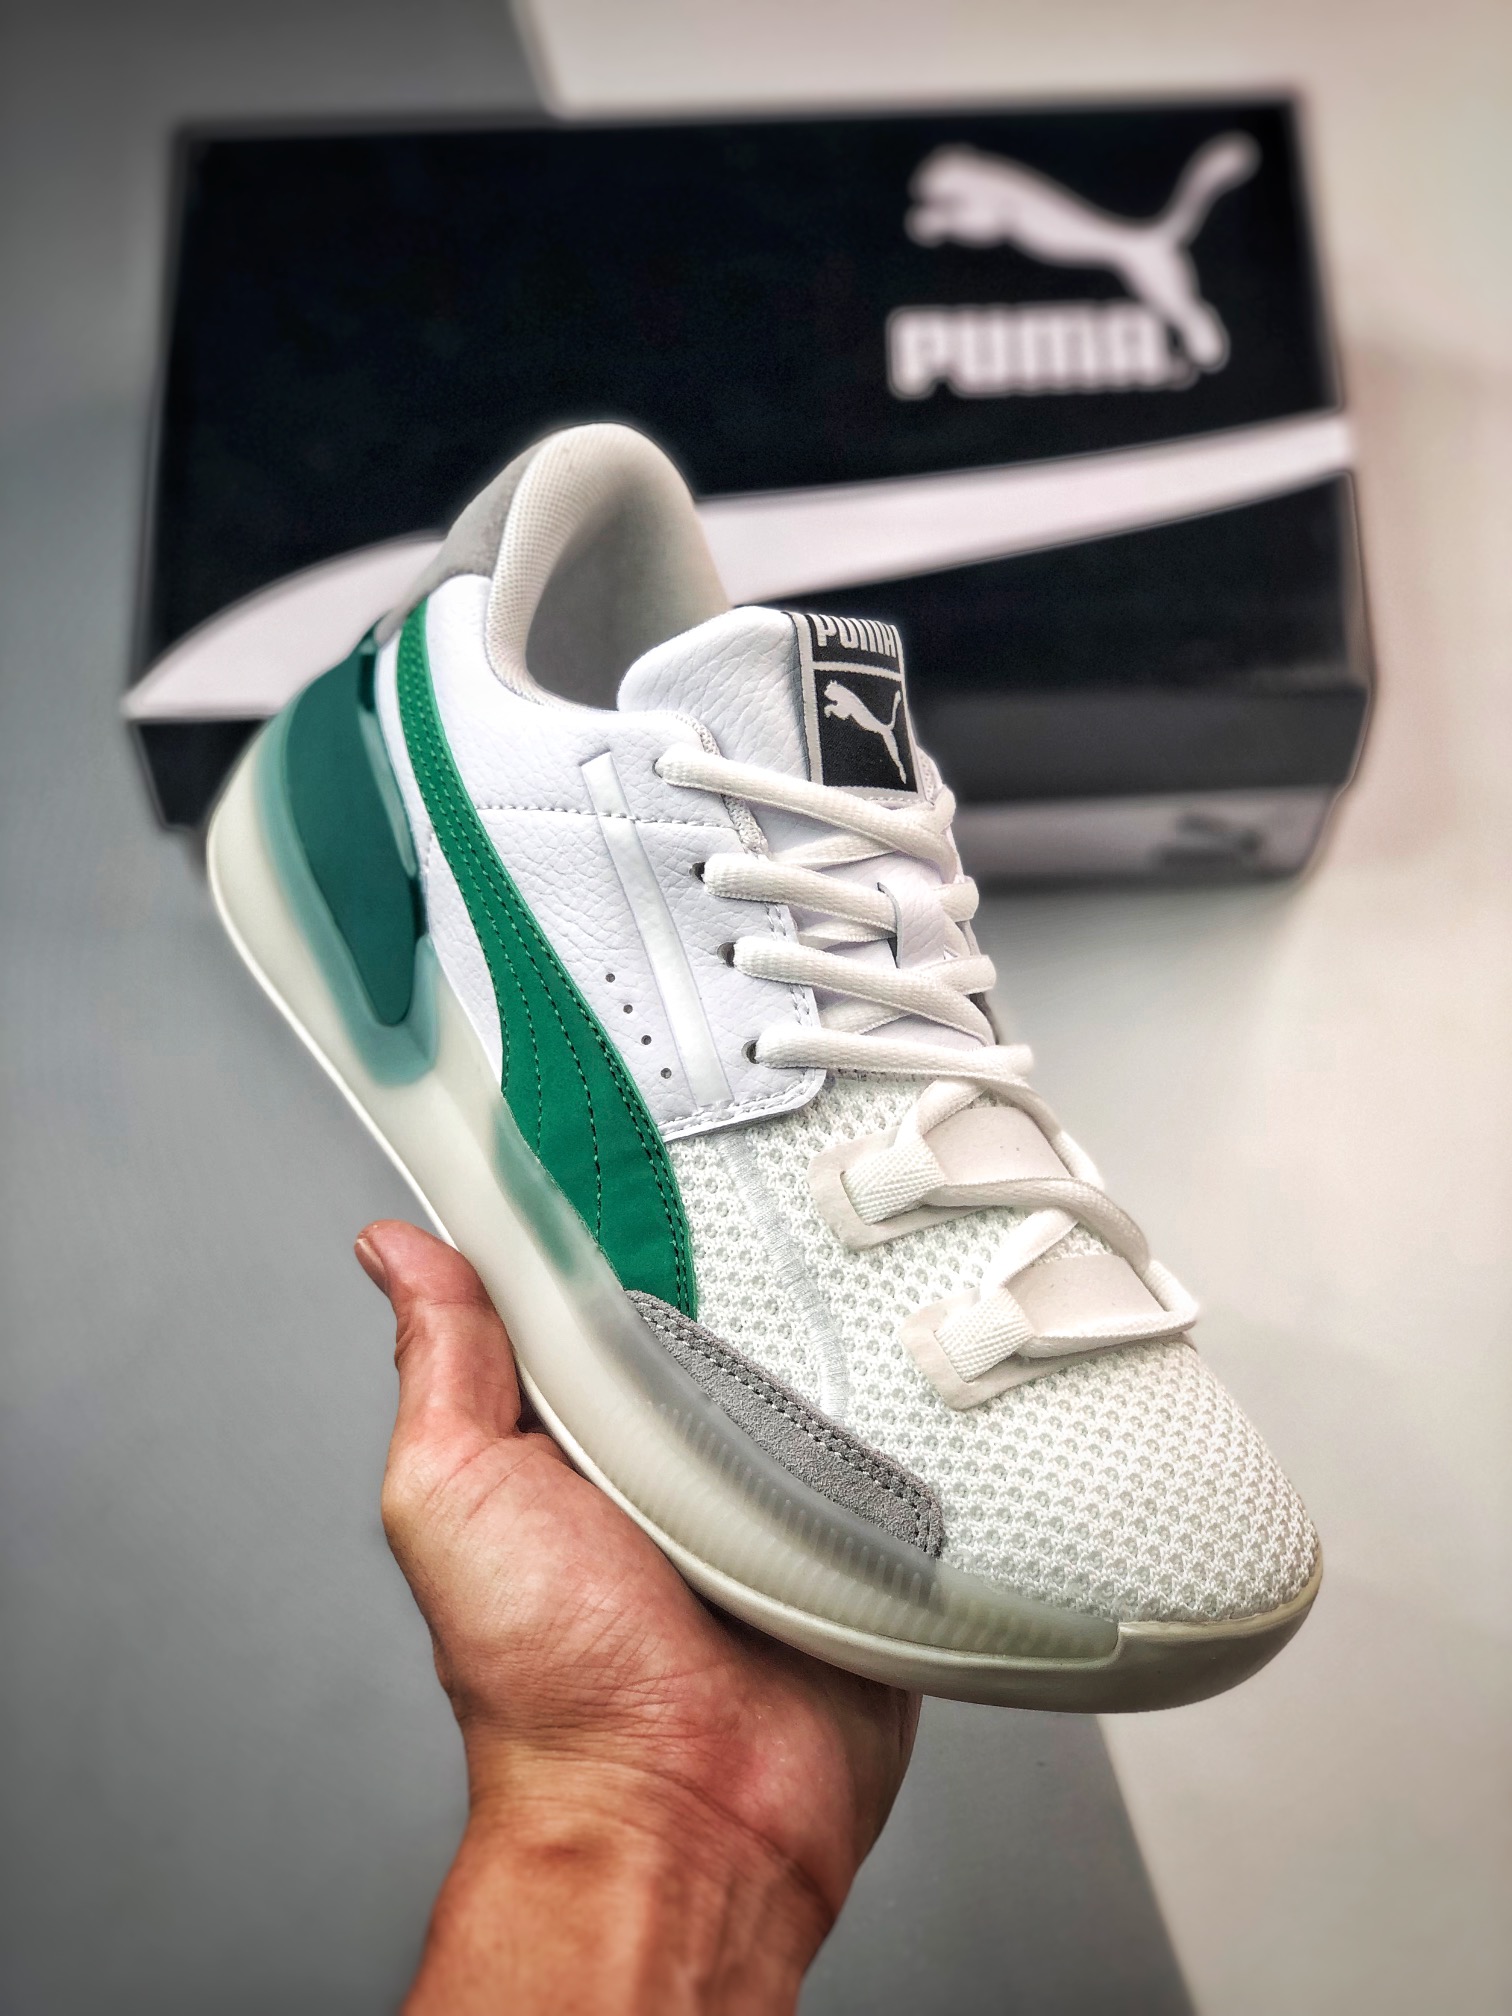 Puma Clyde Hardwood White Green Shoes